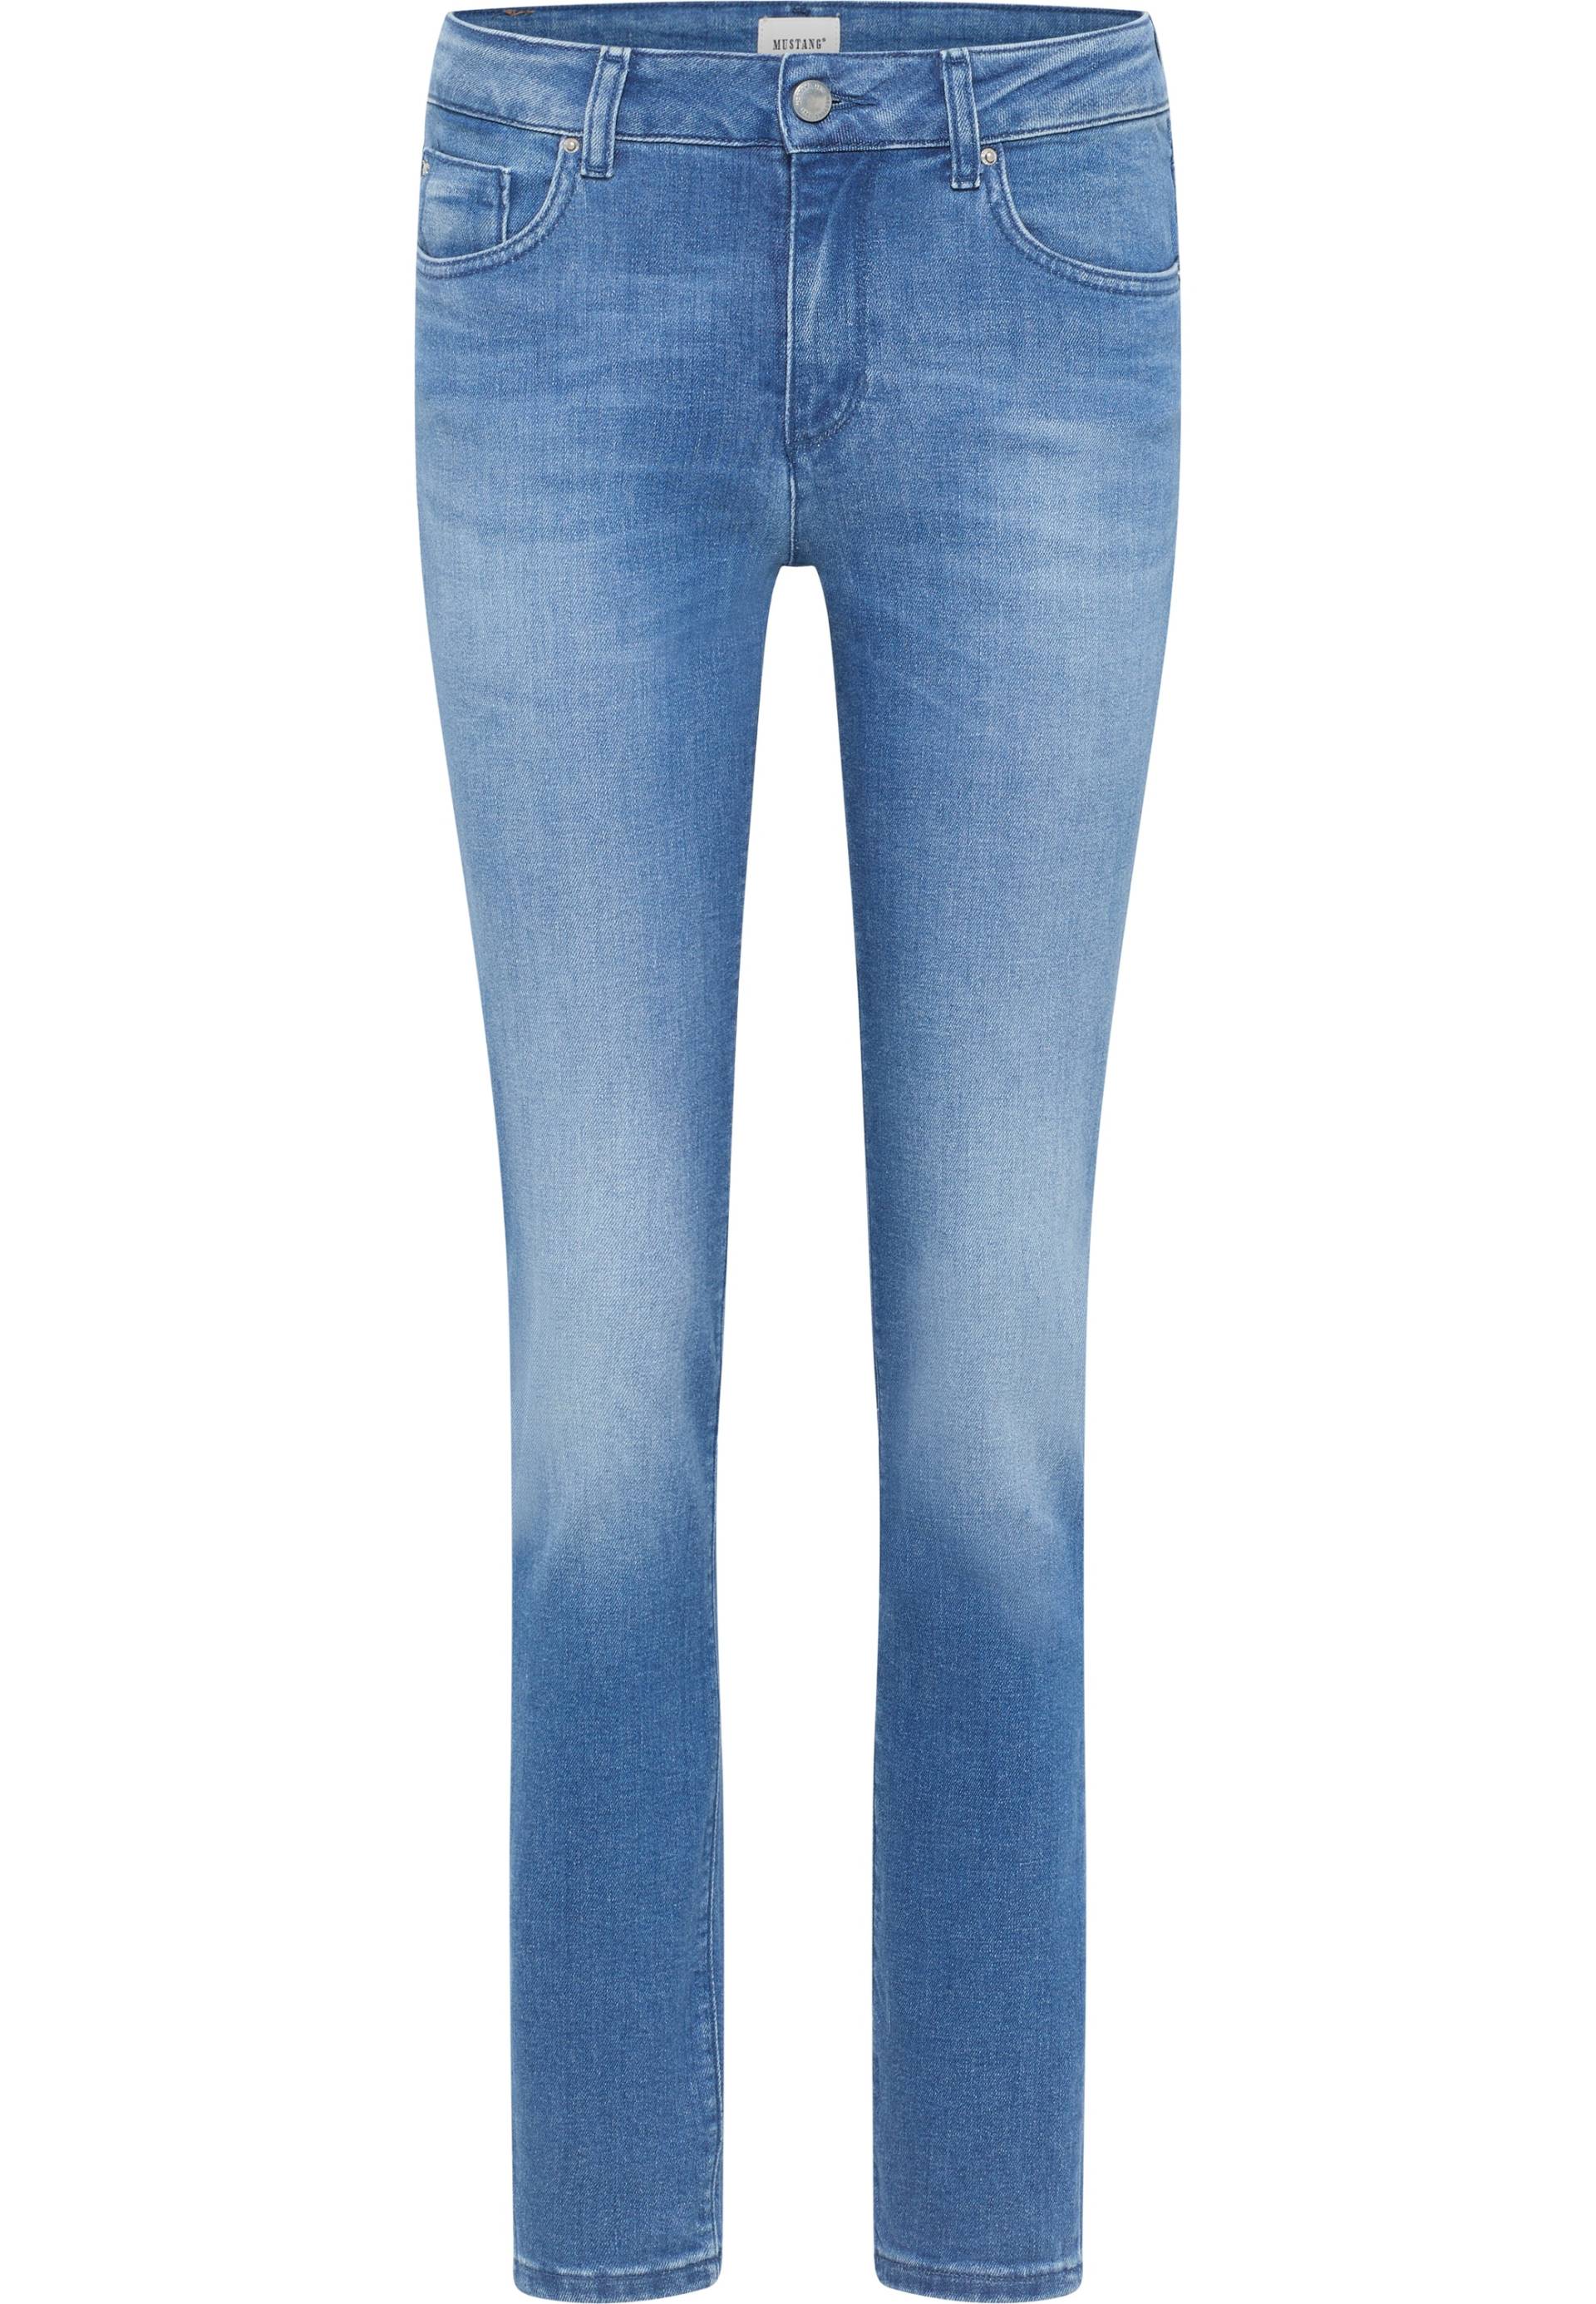 MUSTANG Skinny-fit-Jeans »Style Shelby Skinny« von mustang